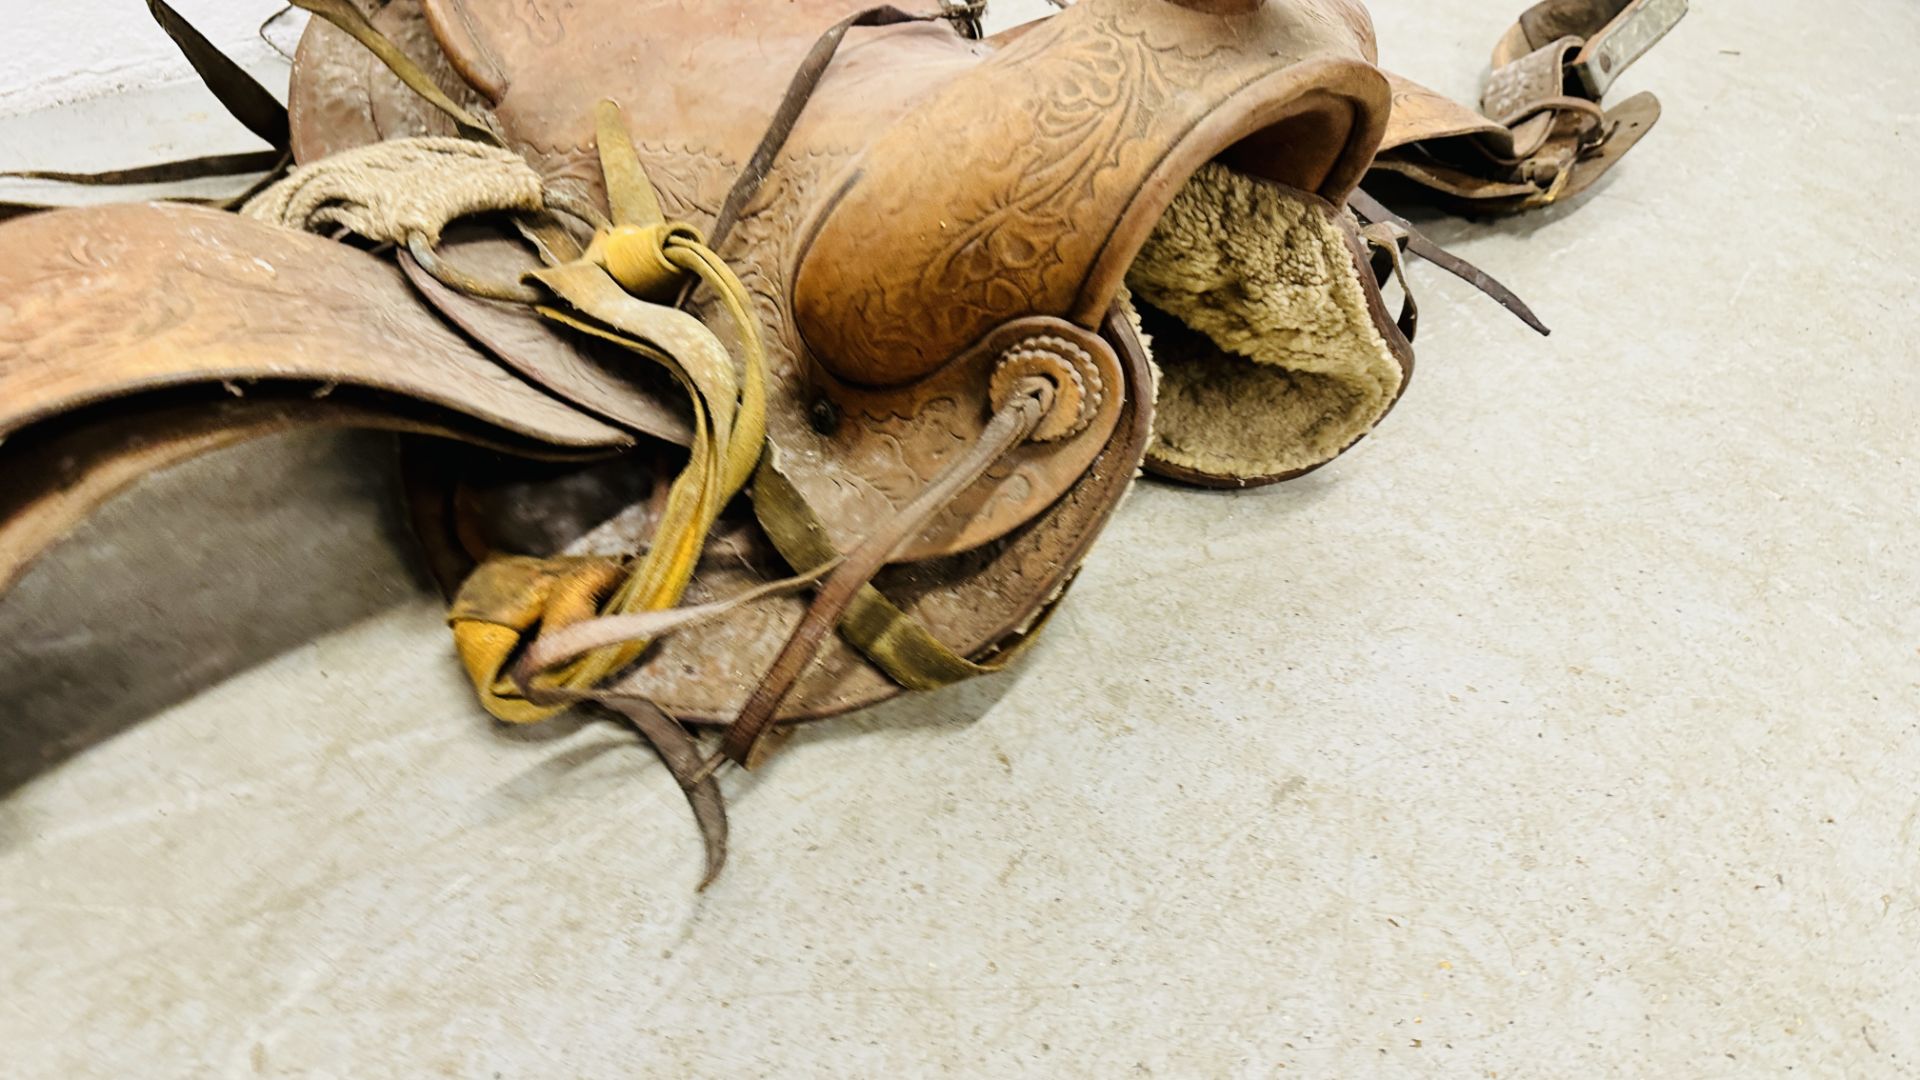 A VINTAGE WESTERN COWBOY SADDLE, THE TAN LEATHER WITH EMBOSSED DECORATION. - Image 5 of 11